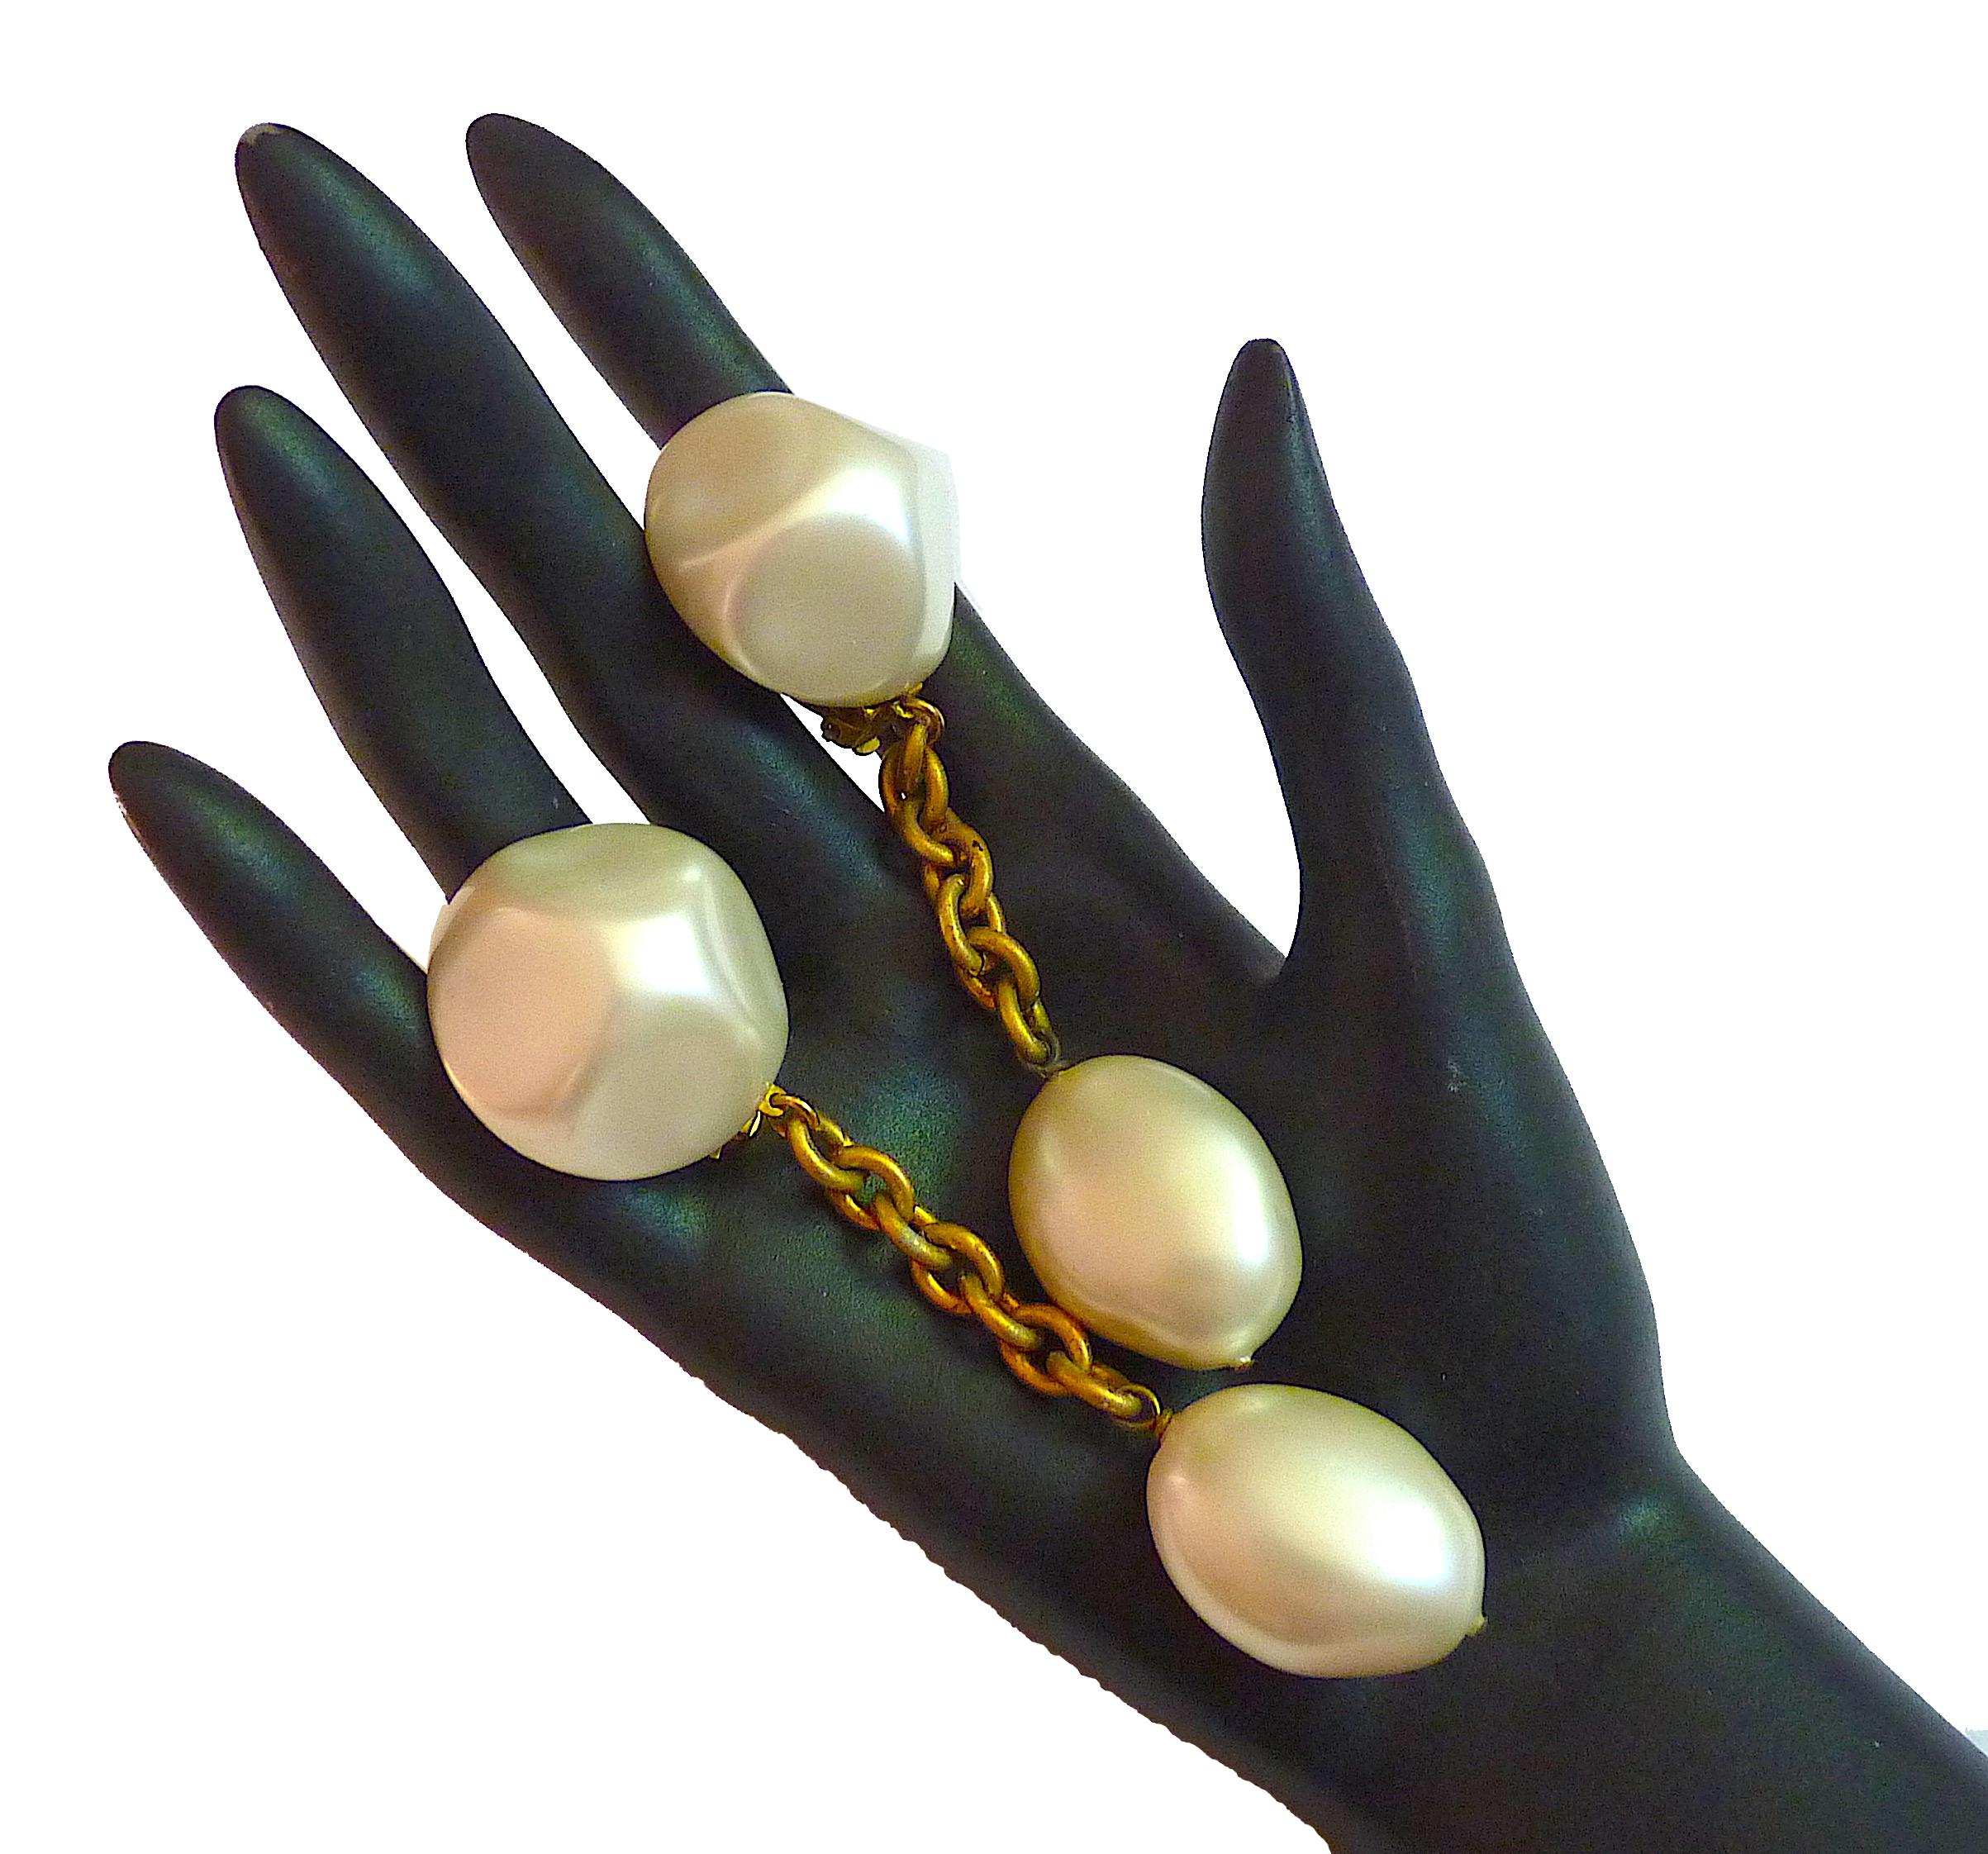 Angelo Tarlazzi Paris Very Long White Faux Pearl and Gold Tone Metal Chain Drop Earrings, Vintage from the 1980s. 

Stamped AngelorTarlazzi Paris  La Porte Bleue at back of each clip

CONDITION : Very nice vintage condition

Total Length : around 8